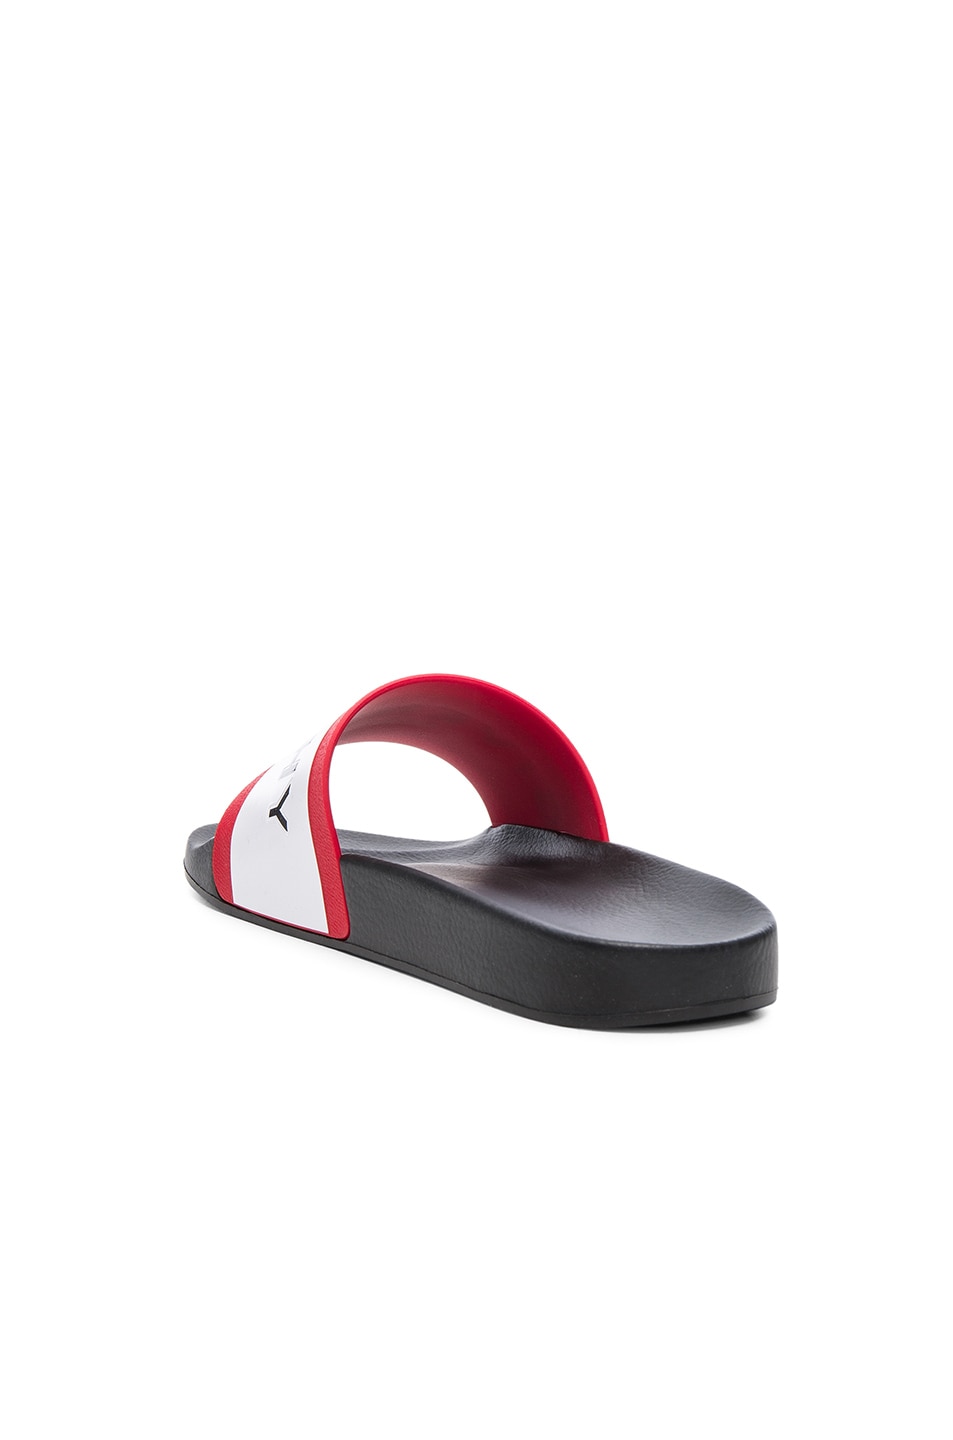 givenchy slides red and black